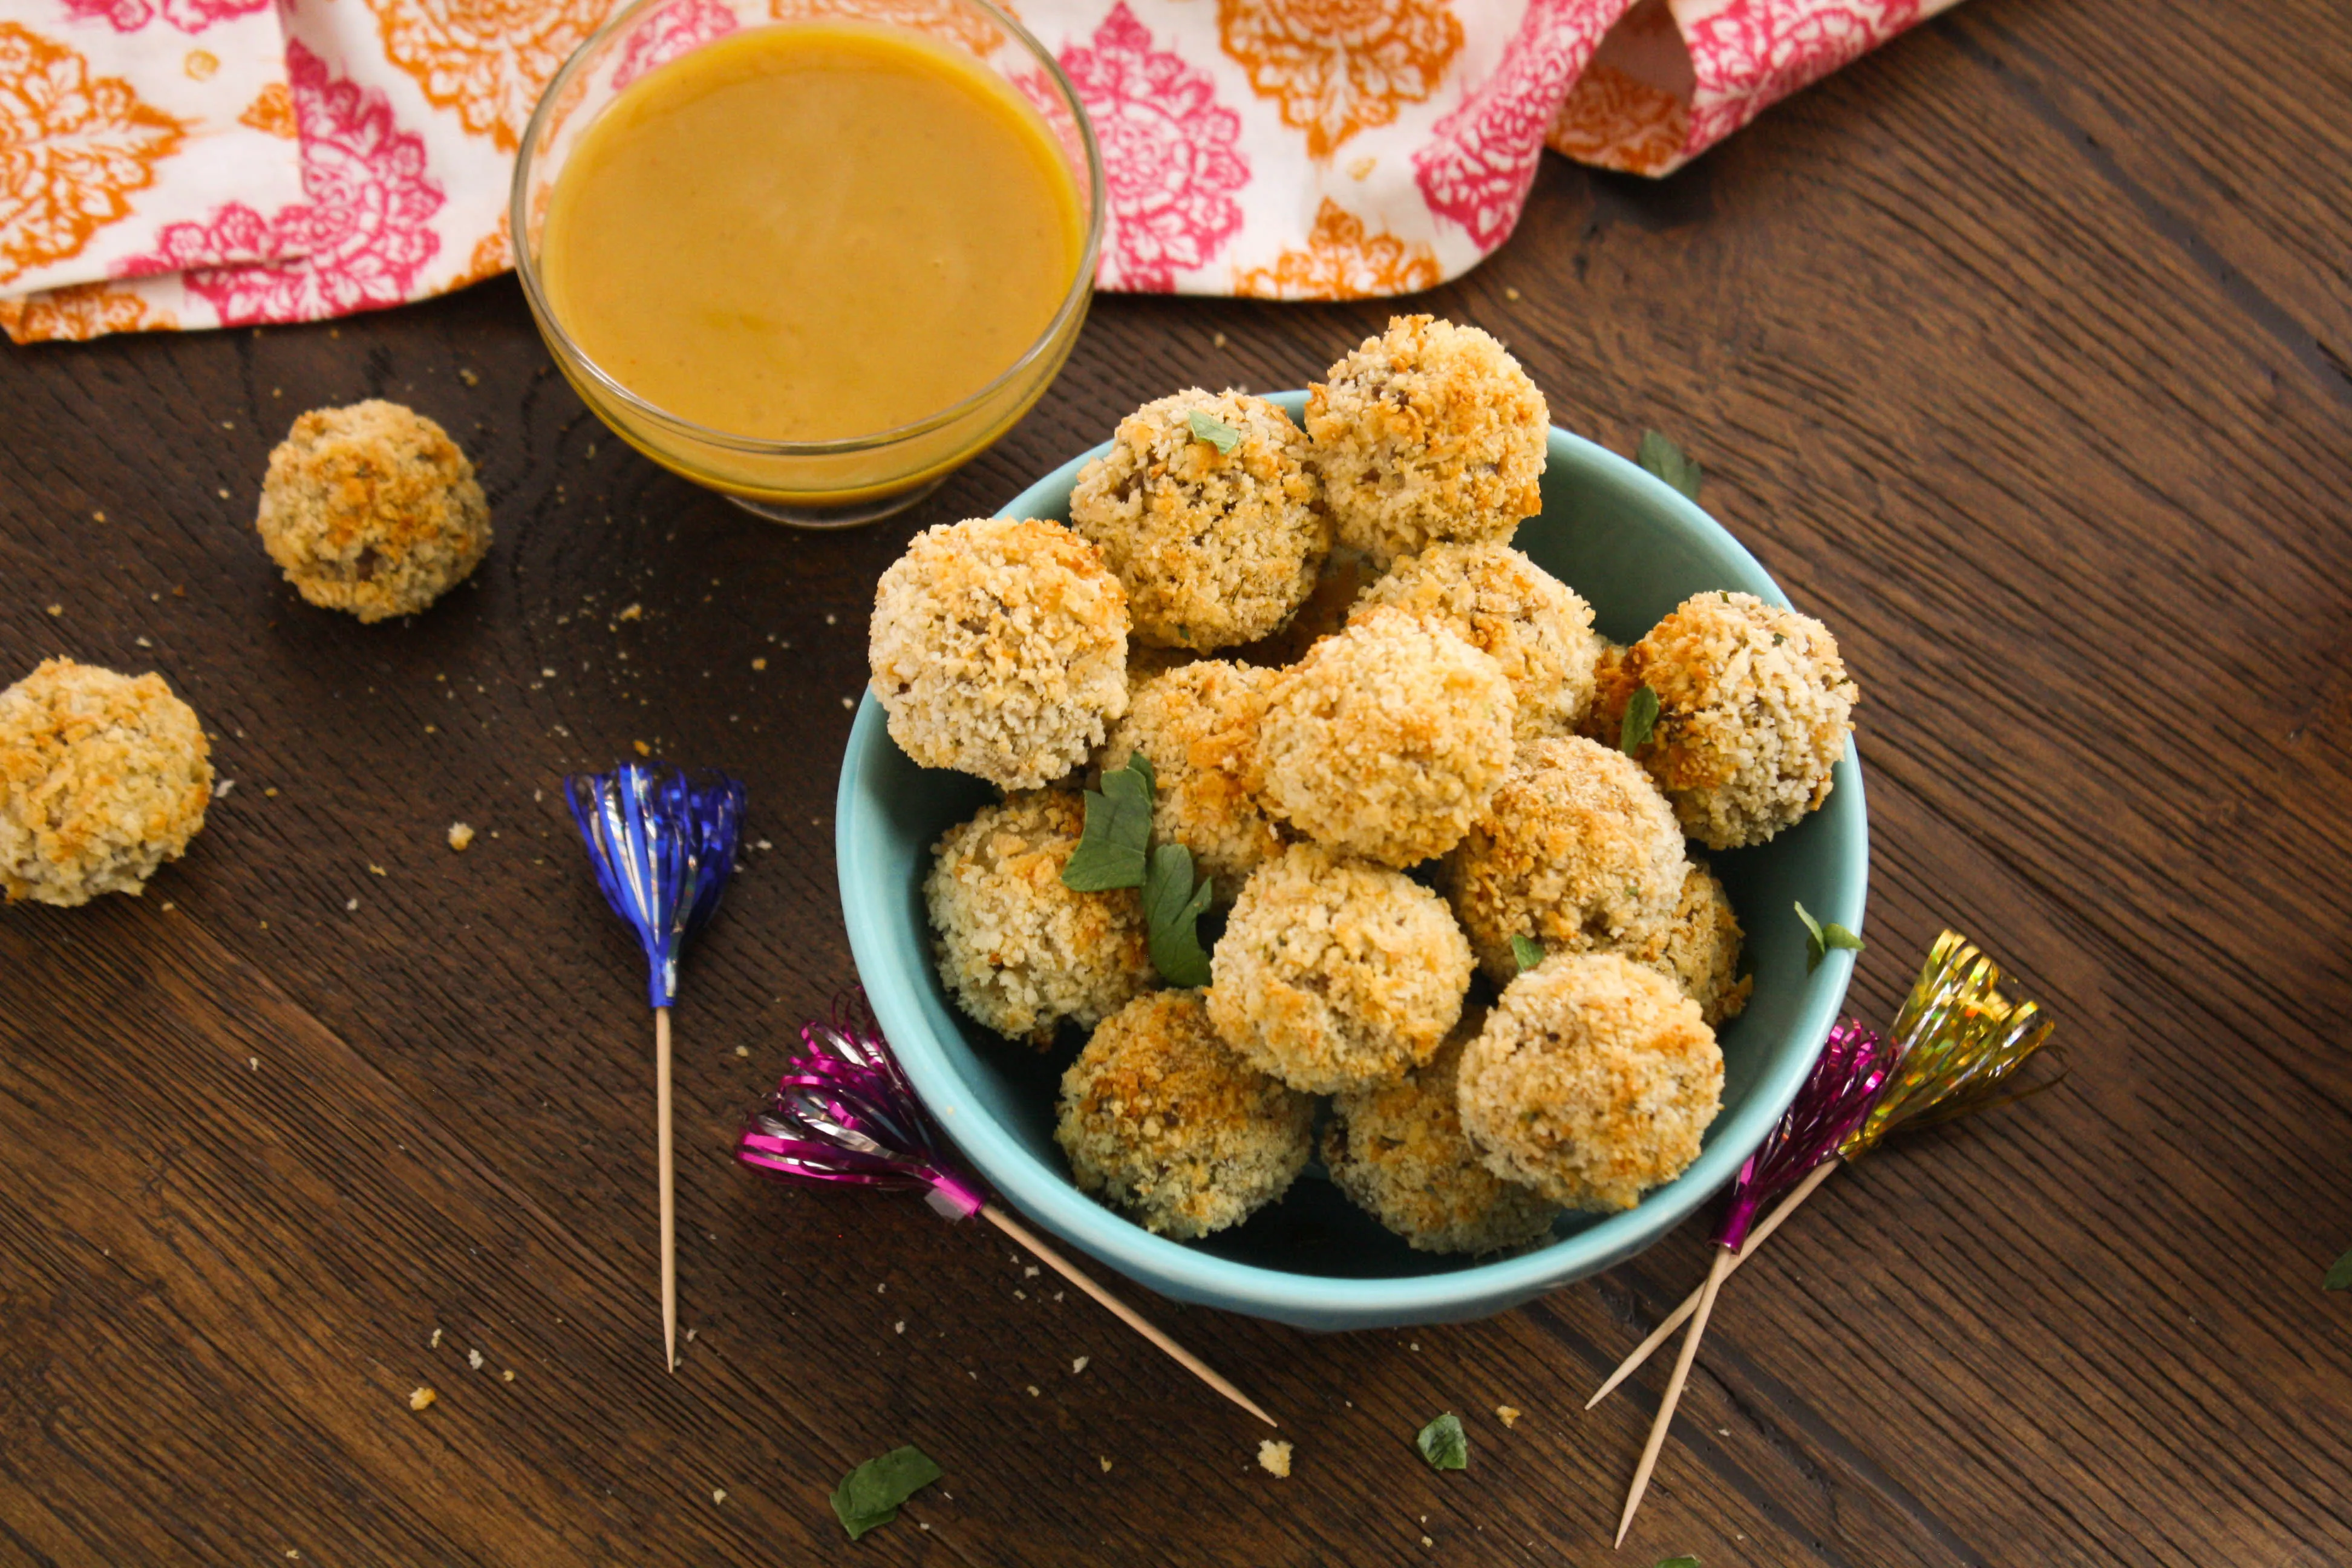 Baked Sauerkraut Balls are such a fun treat! These appetizers are so tasty, and party perfect!